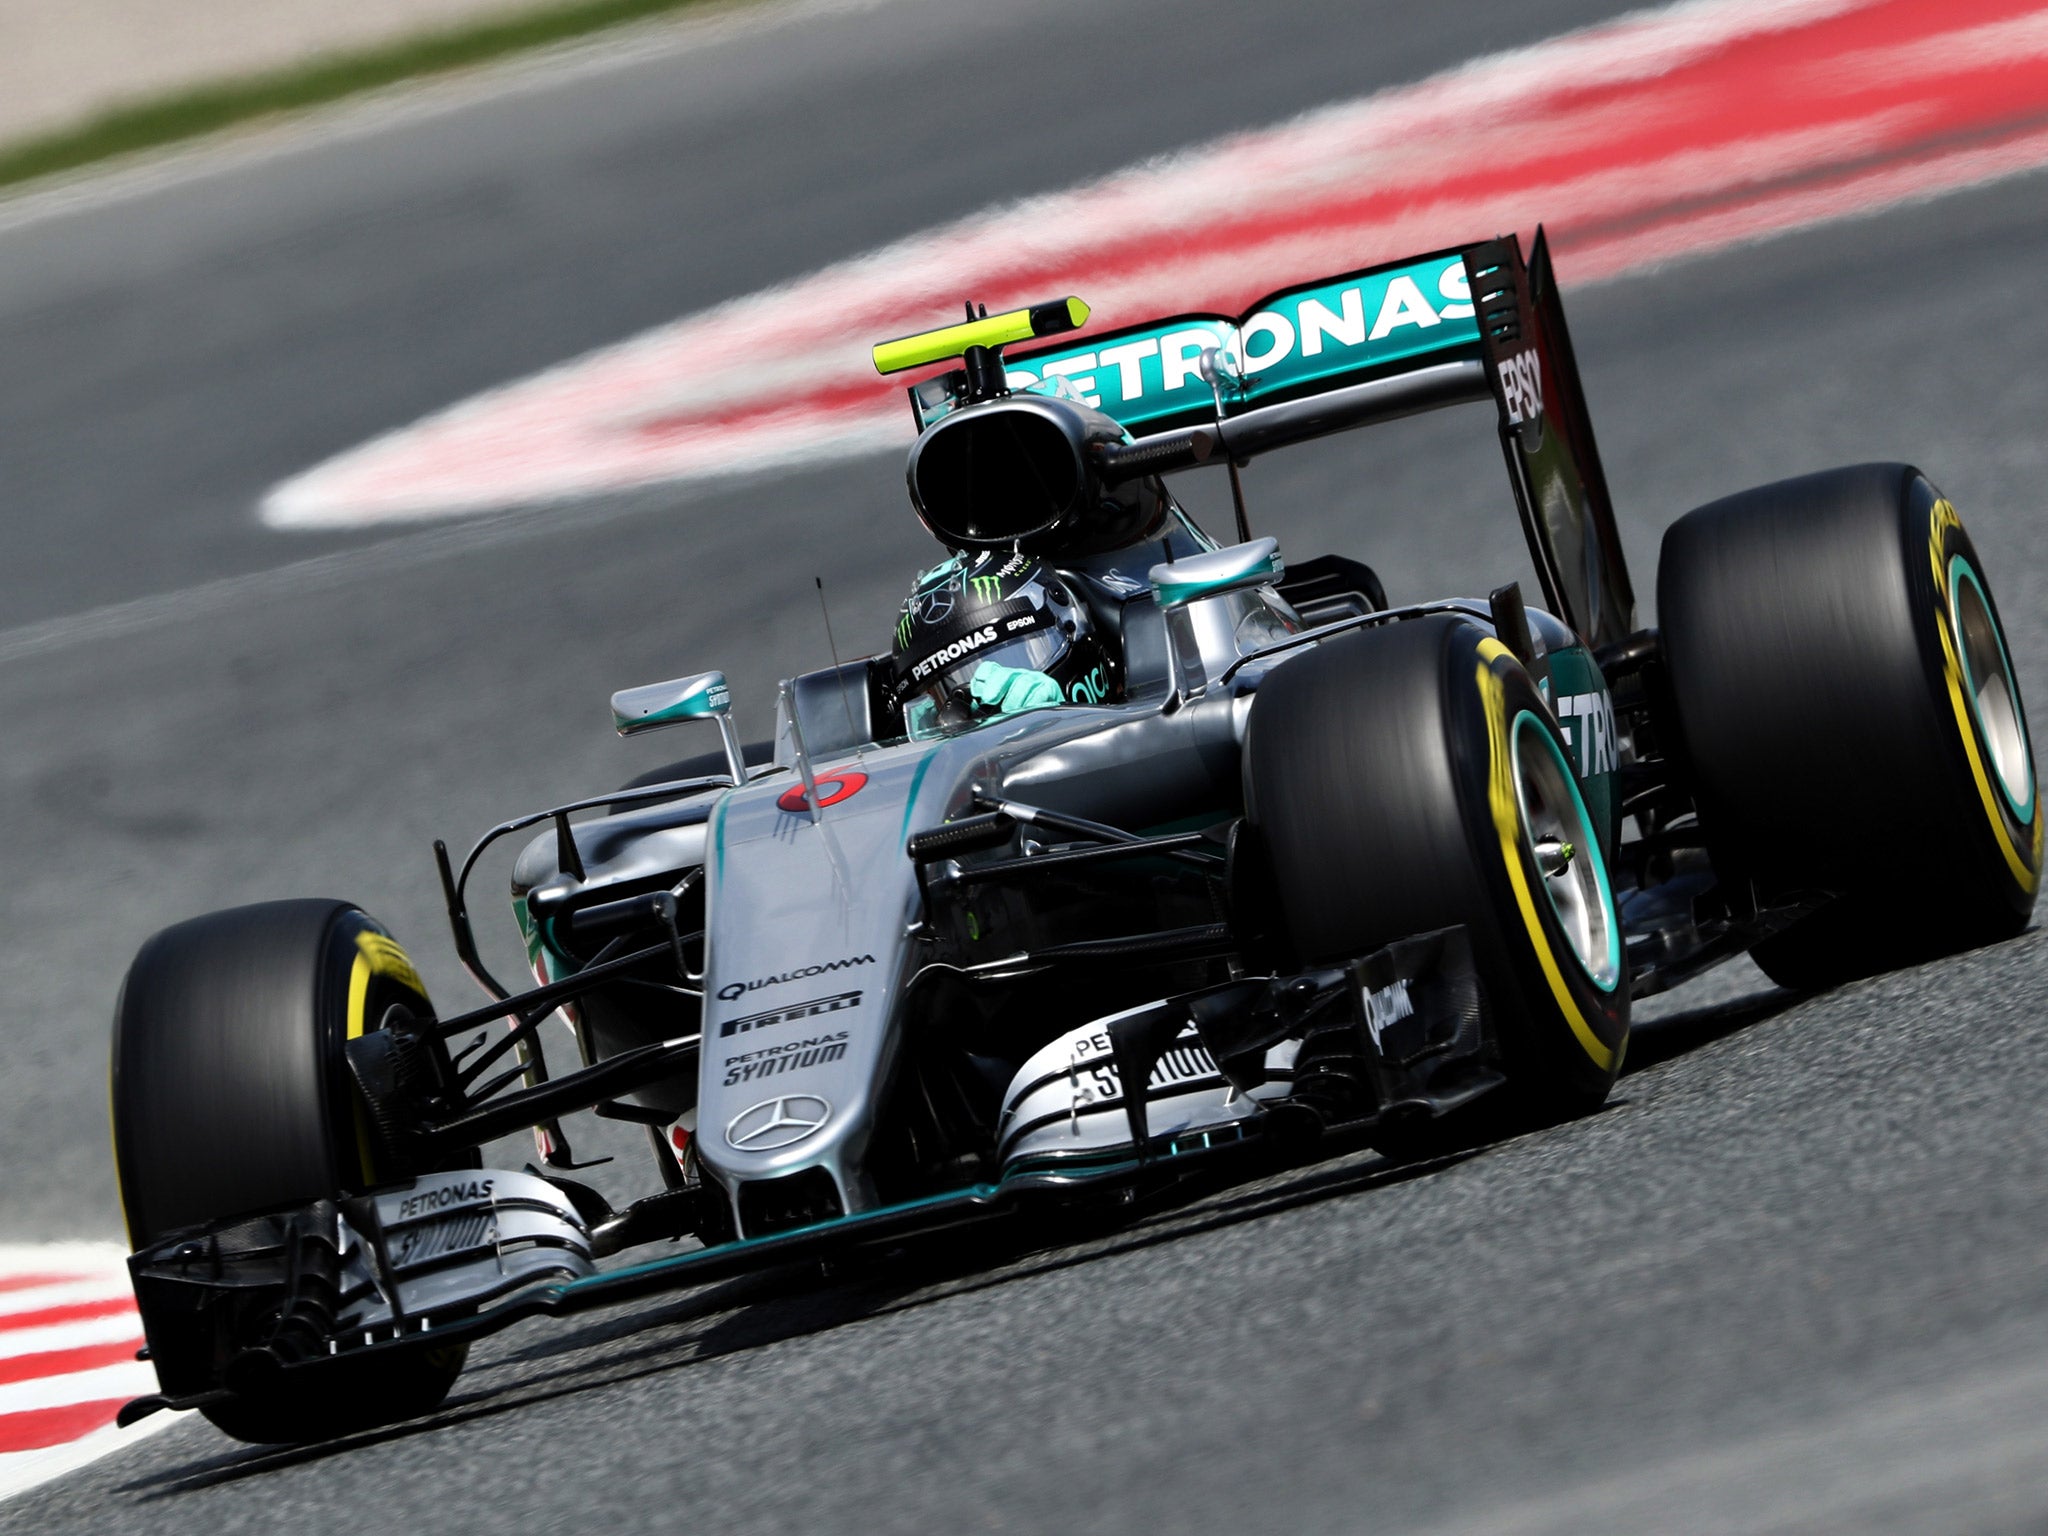 Nico Rosberg continued his dominant start to 2016 by posting the fastest time in practice